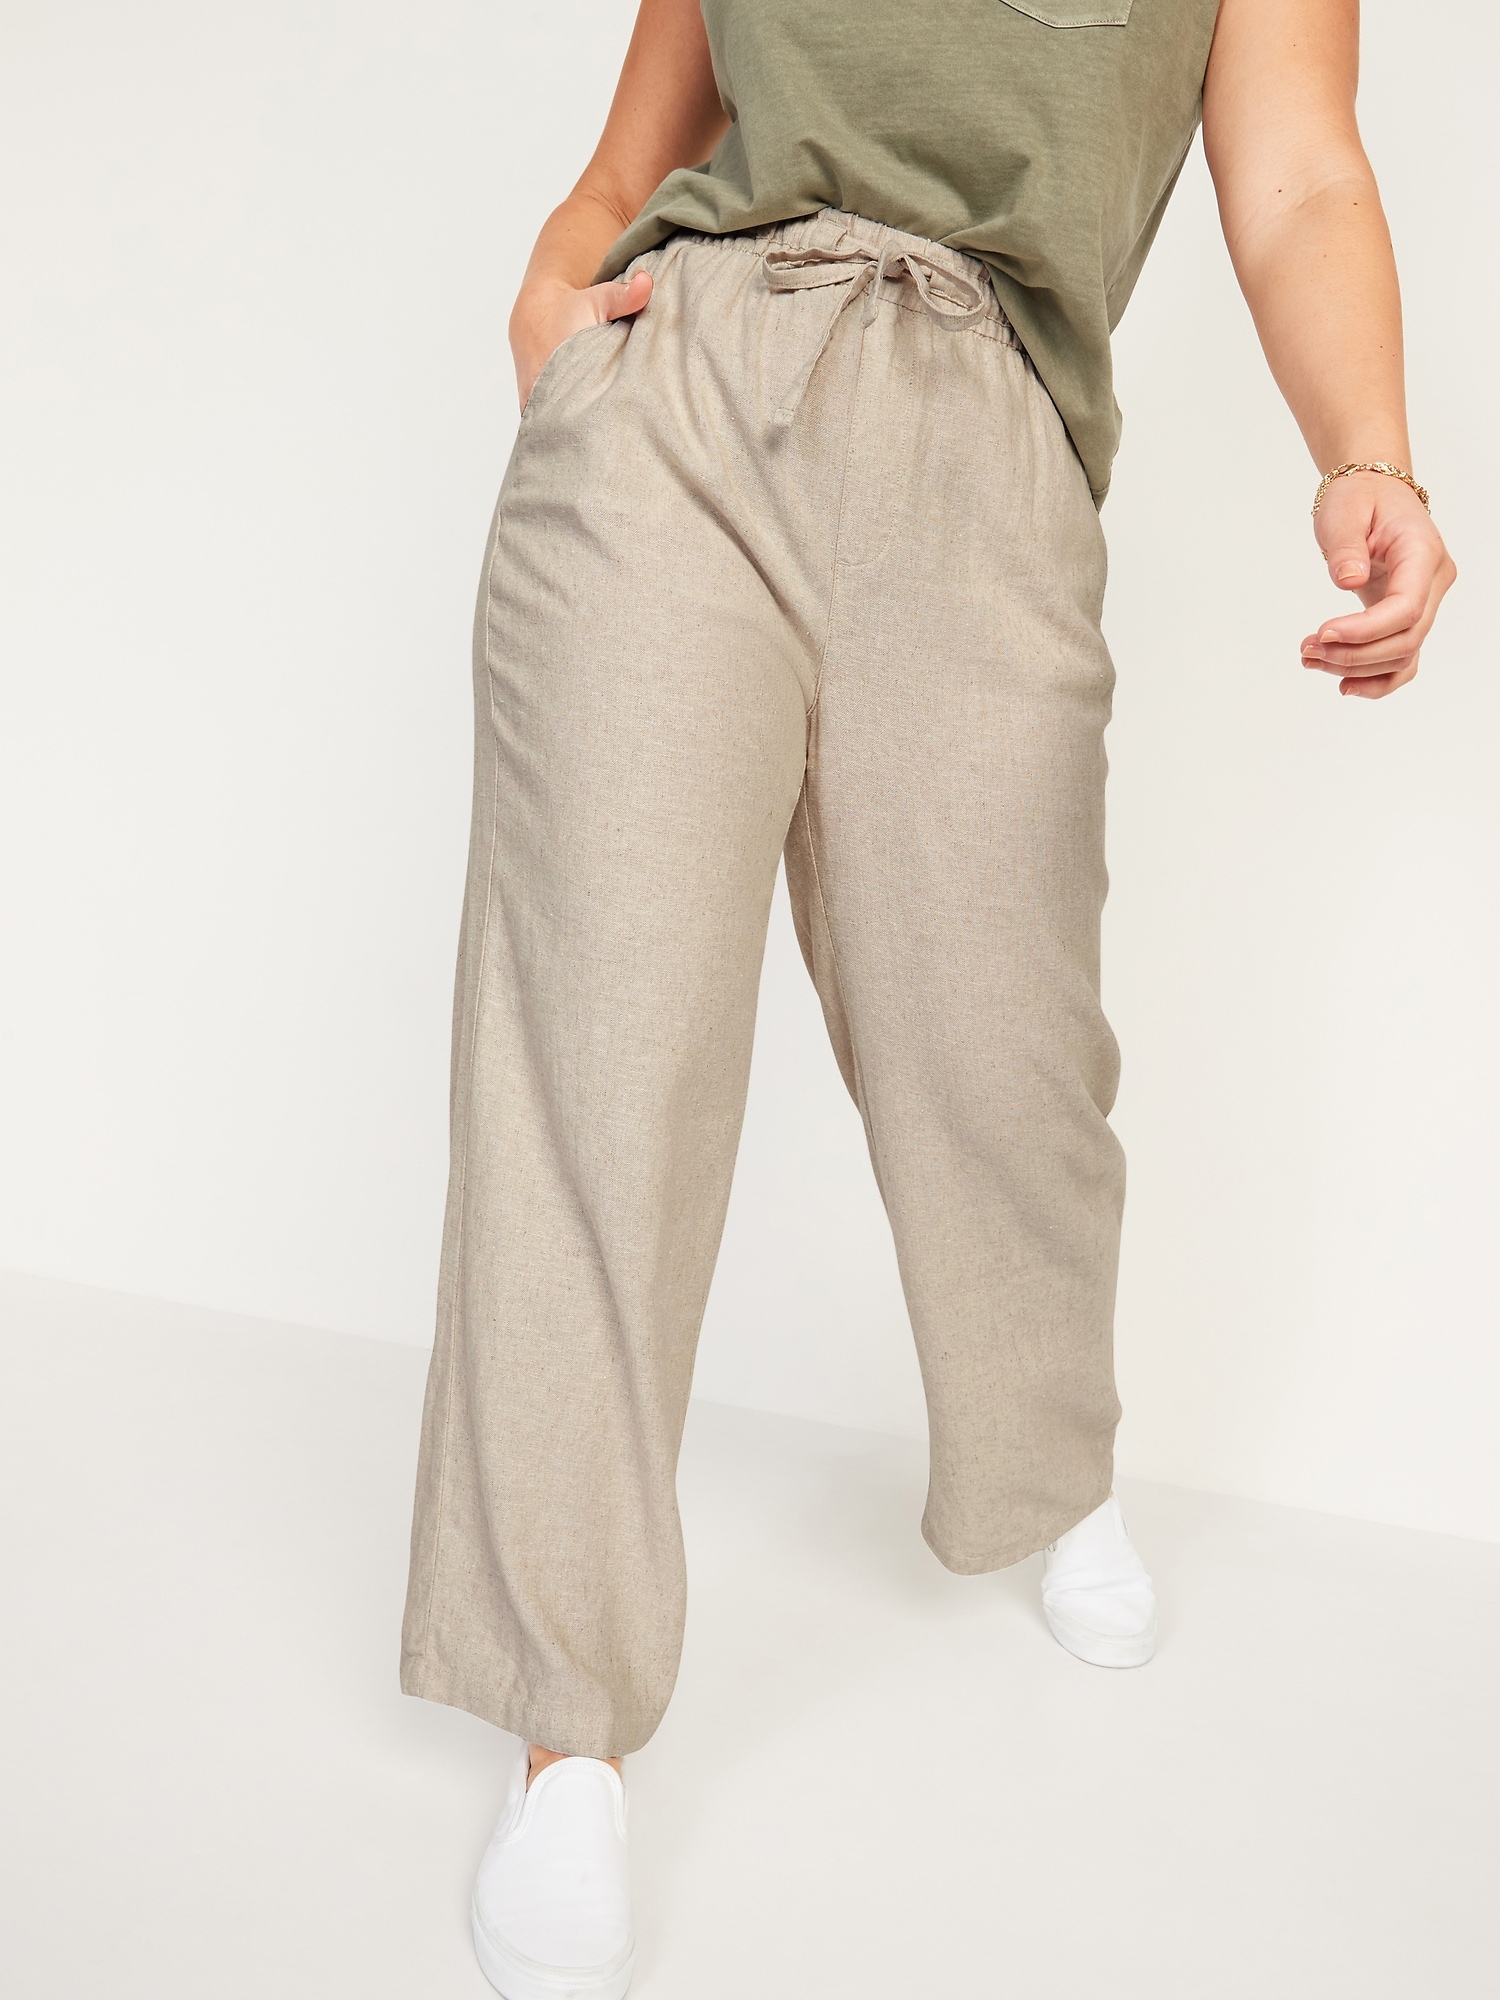 Old Navy, Pants & Jumpsuits, Old Navy Linen Pants